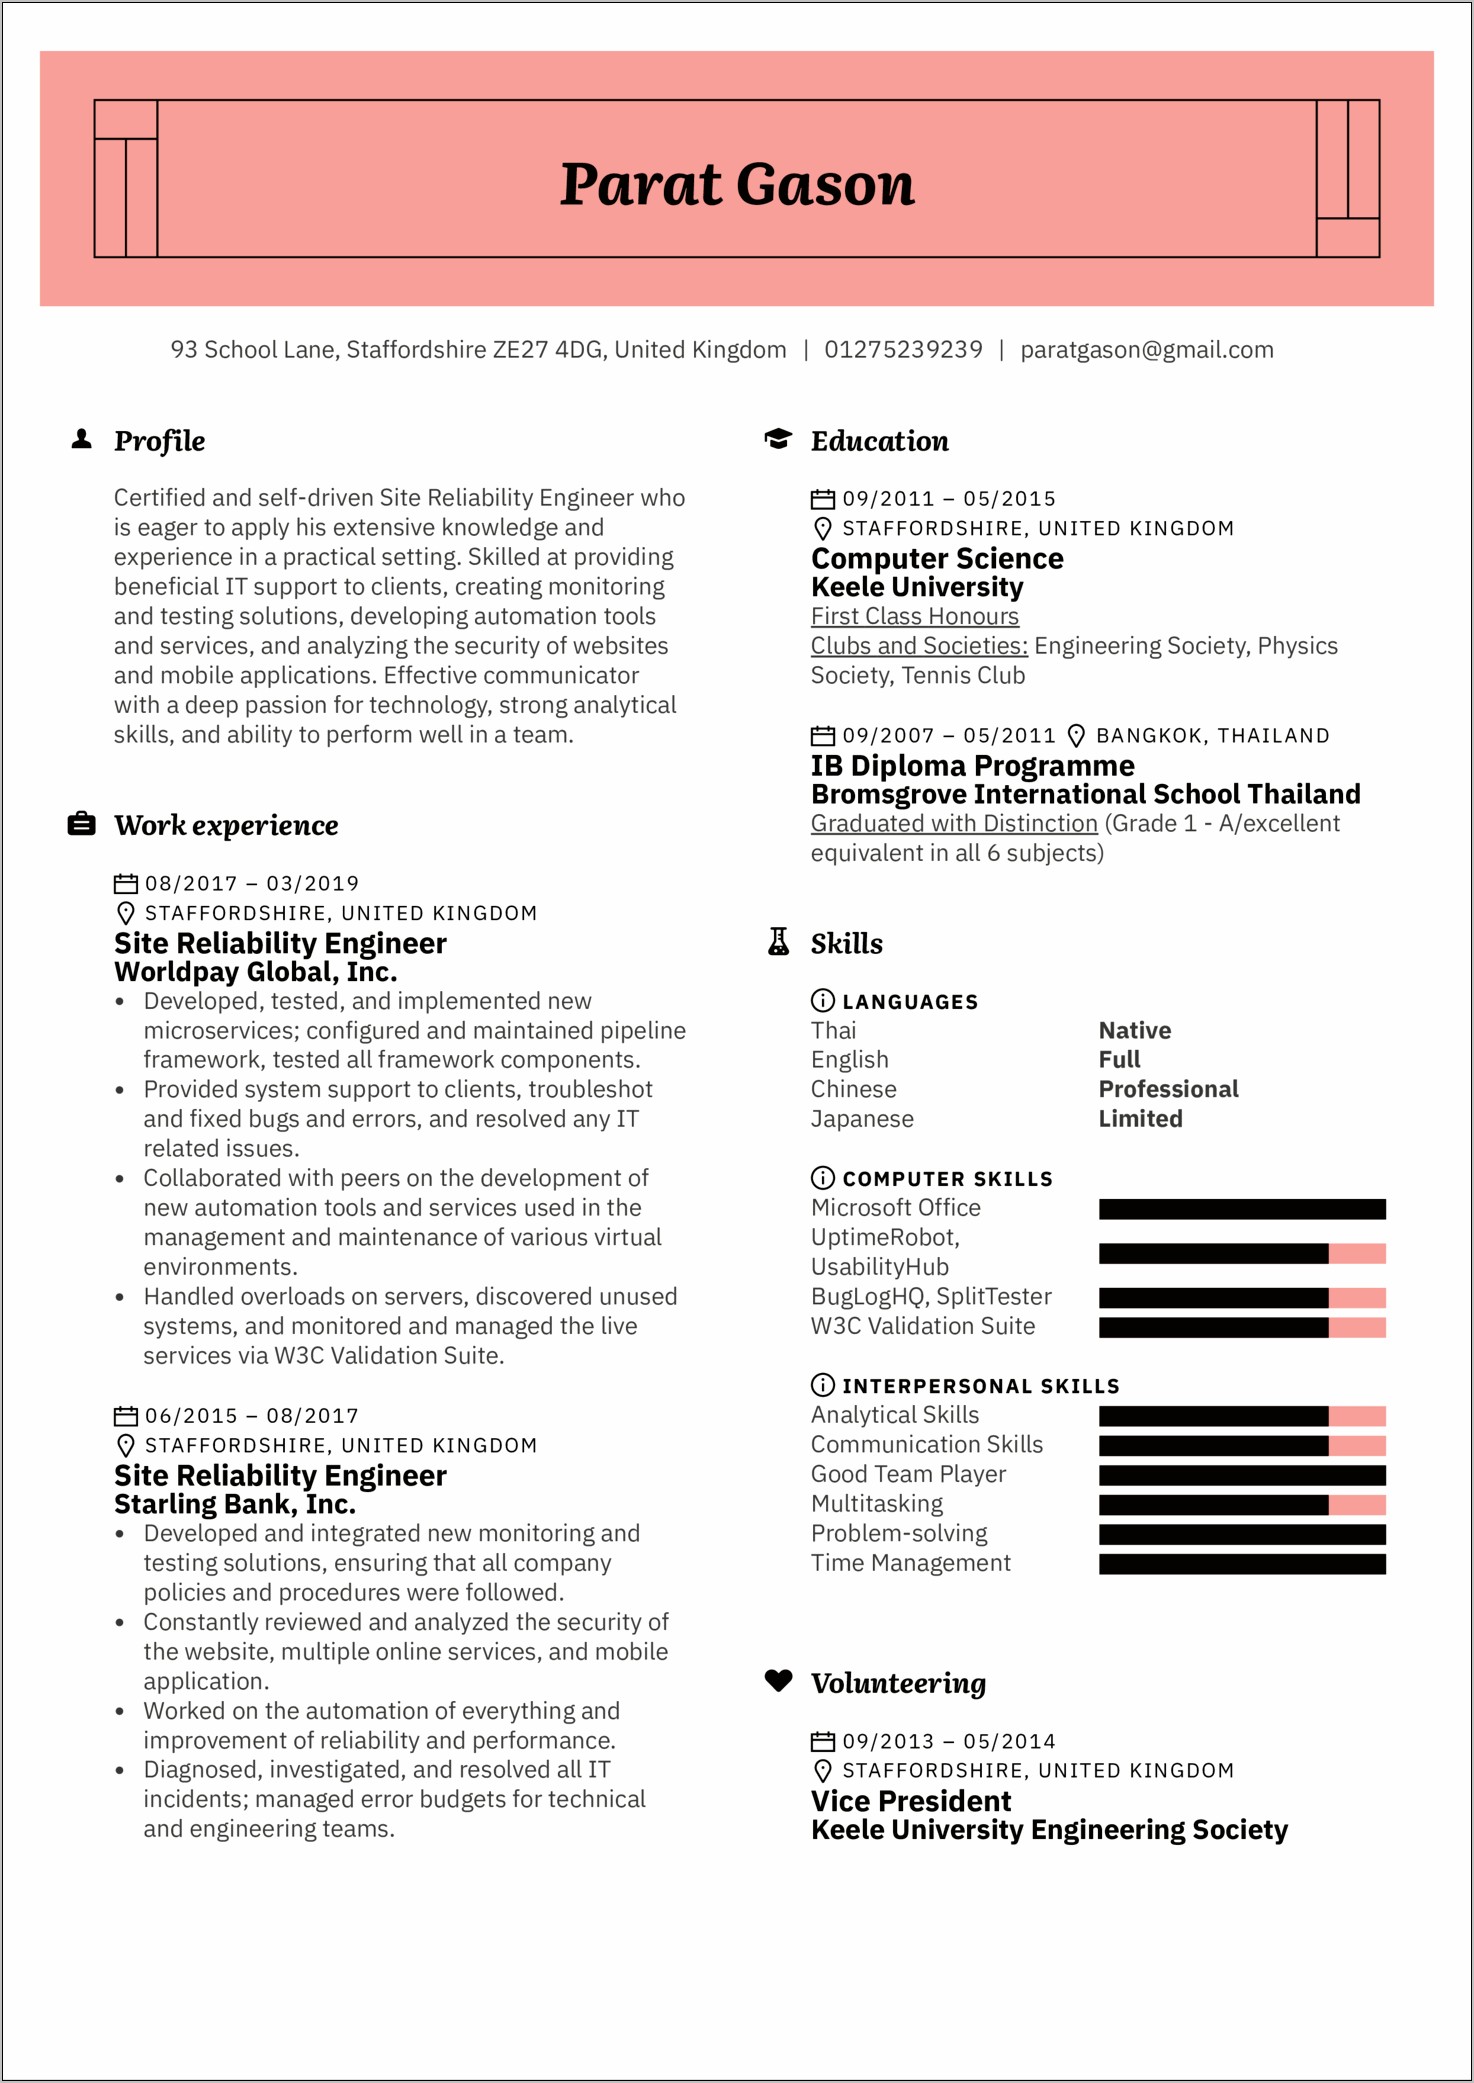 Resume Improve Communication With Staff Example